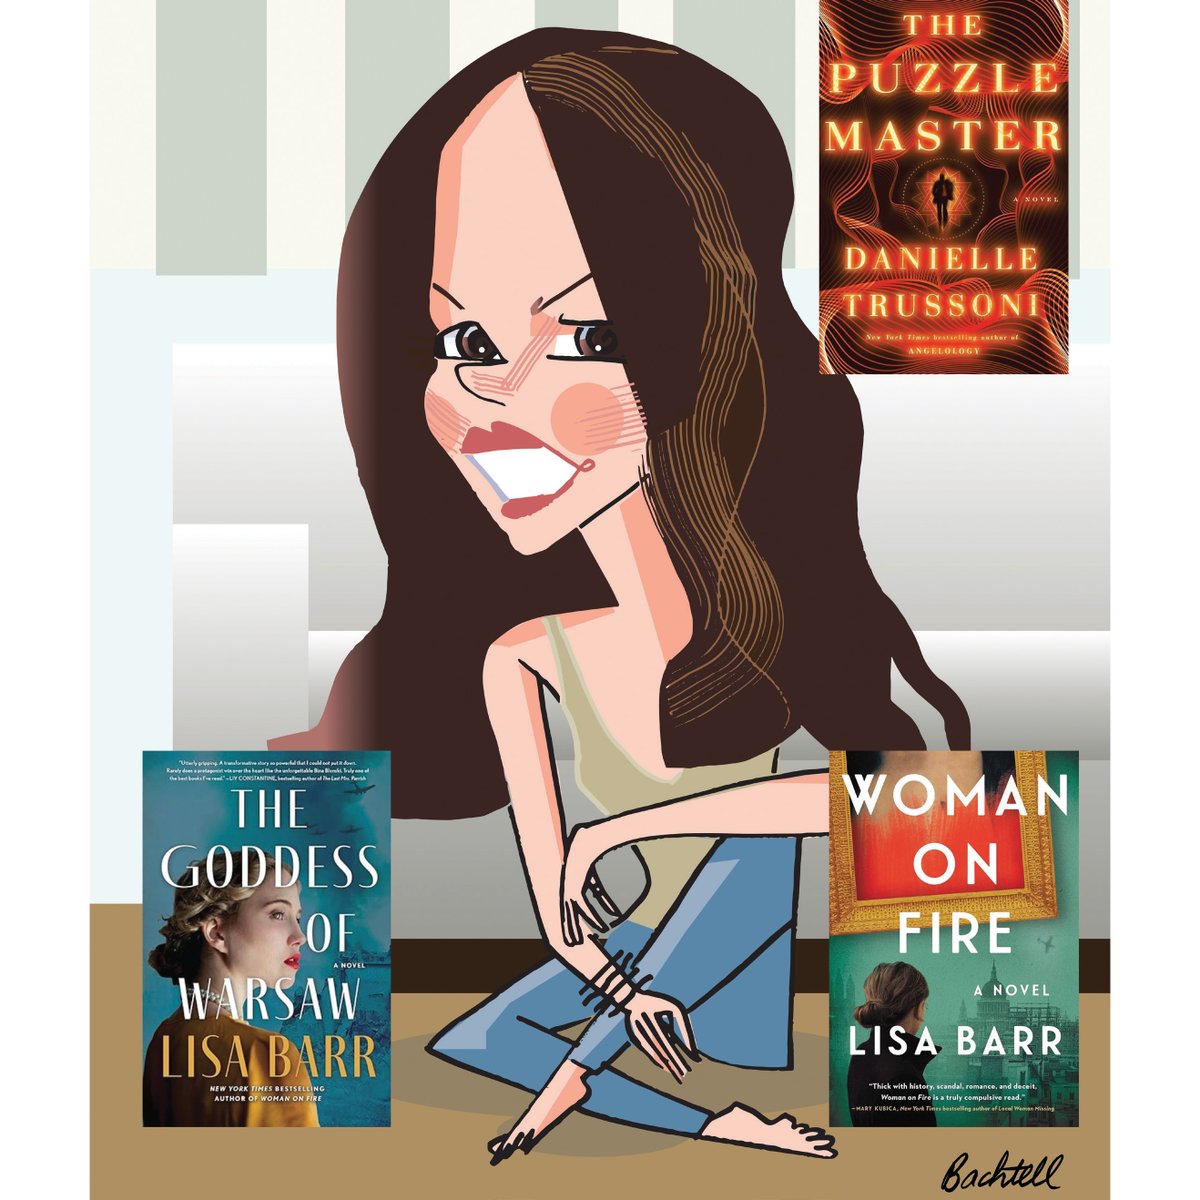 Lisa Barr is poised to release her highly anticipated new historical thriller—'The Goddess of Warsaw,' a harrowing and ultimately triumphant tale of a Jewish WWII assassin turned Hollywood star. bit.ly/3Unvu5H Illustration: Tom Bachtell